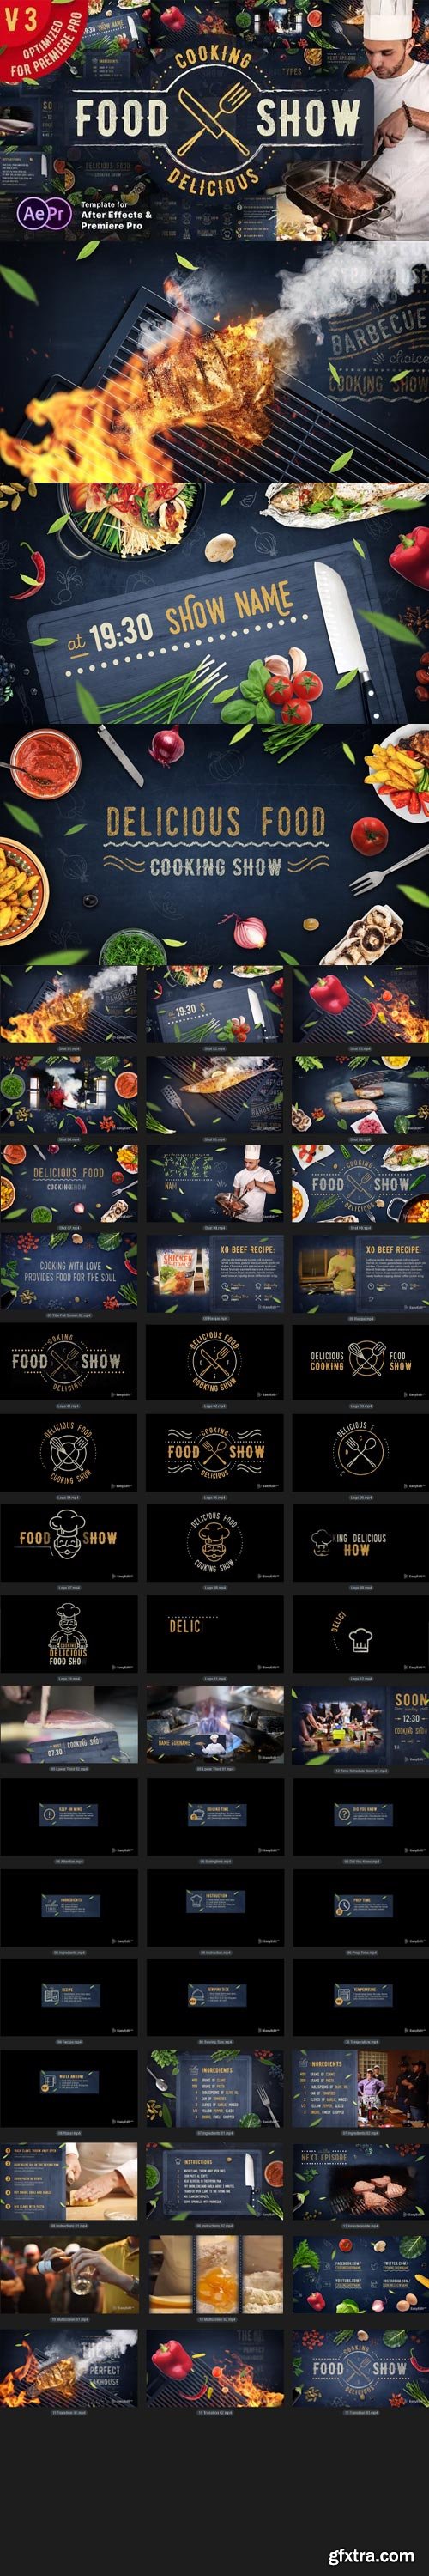 Videohive - Cooking Delicious Food Show - 16605706 - V3.4